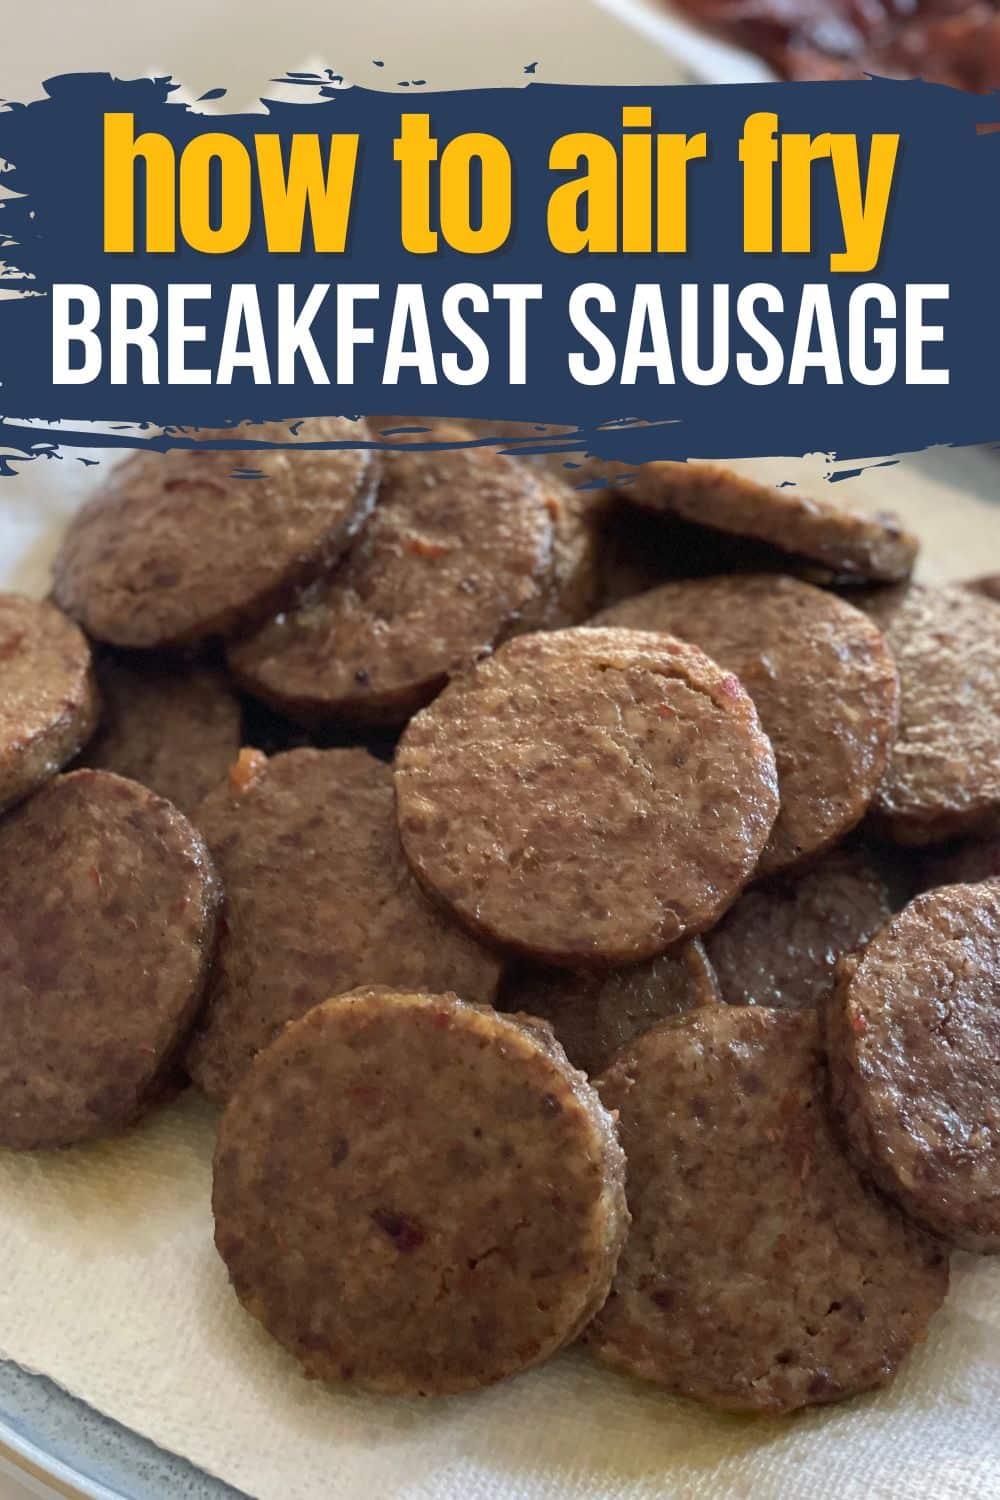 Overhead view of a pile of cooked sausage patties with the text "How to Air Fry Breakfast Sausage" overlaid in yellow and white.